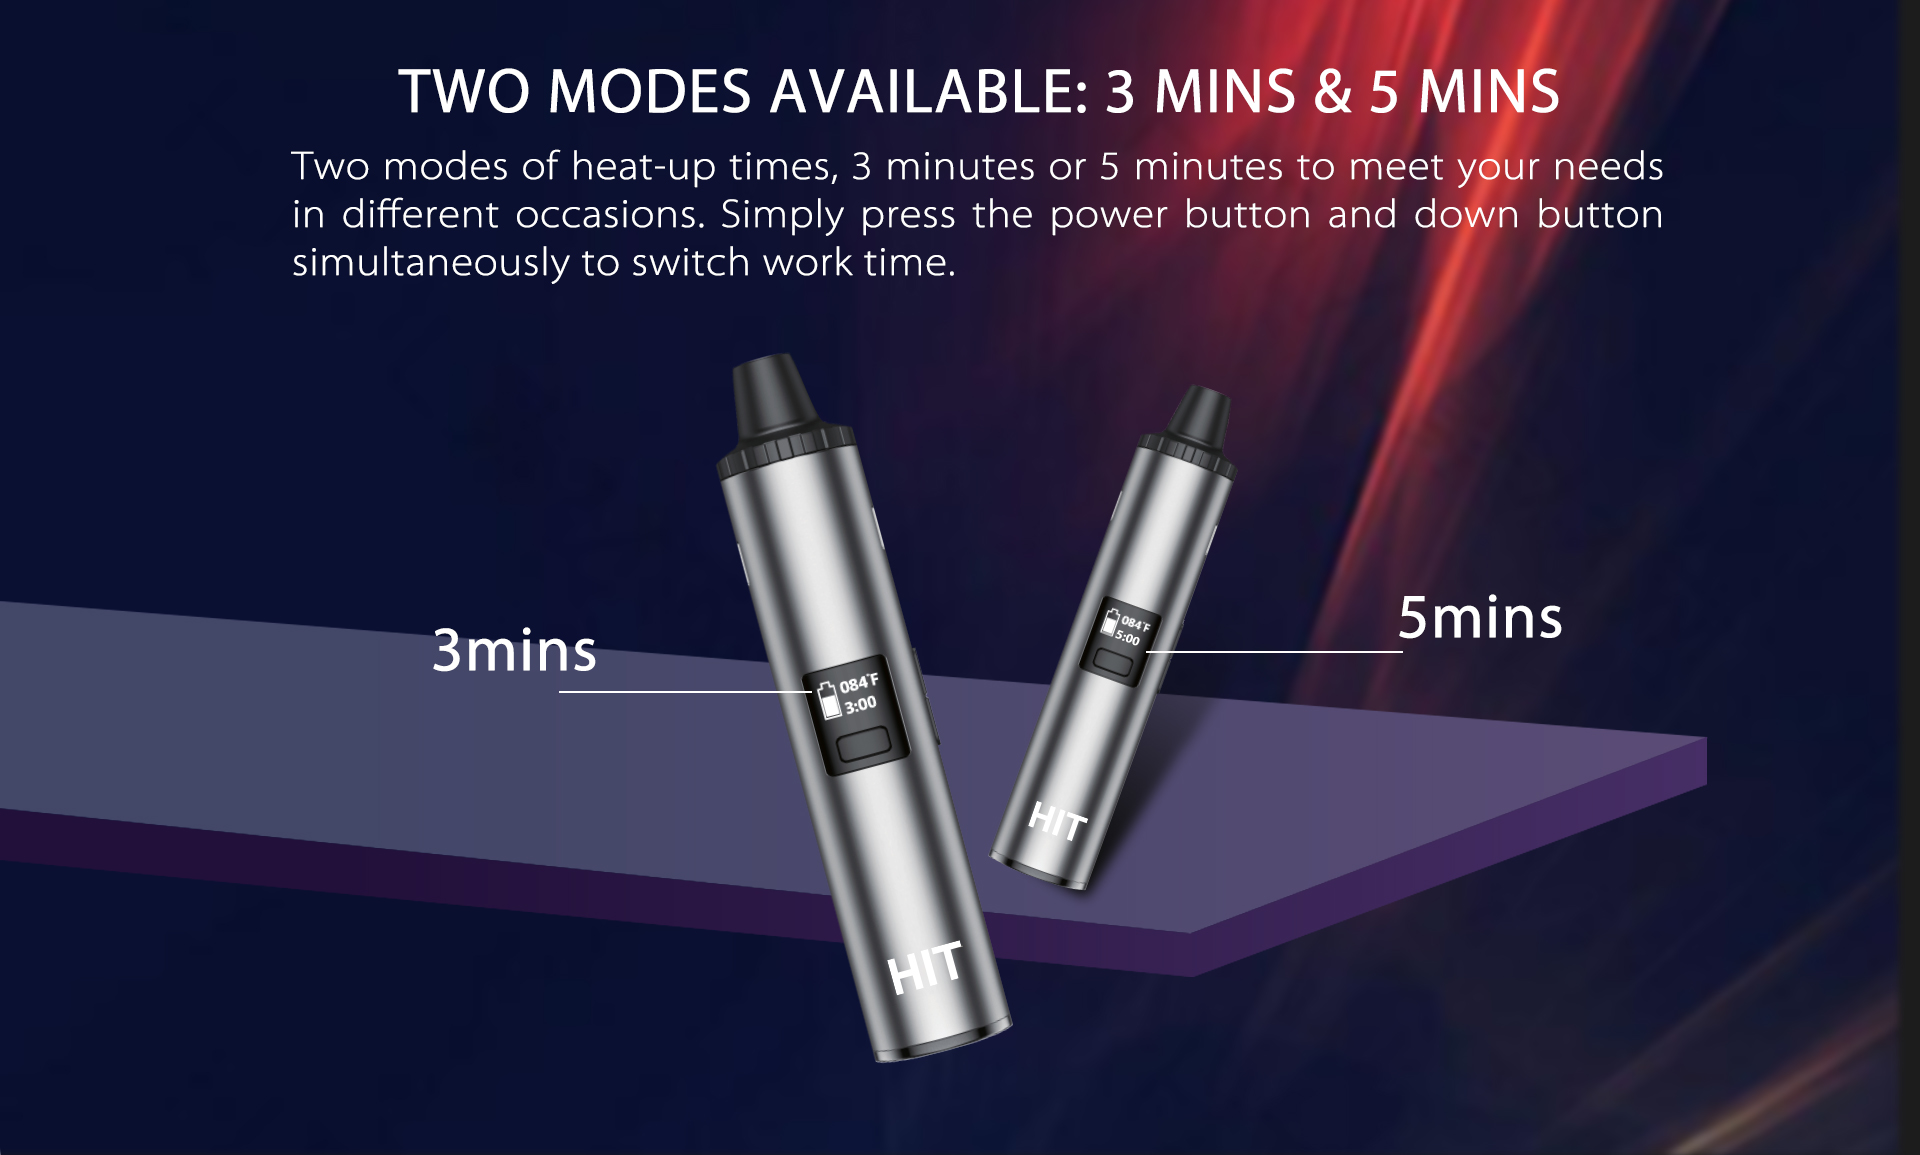 Yocan Hit Vaporizer Pen provide two modes of heat-up time options.